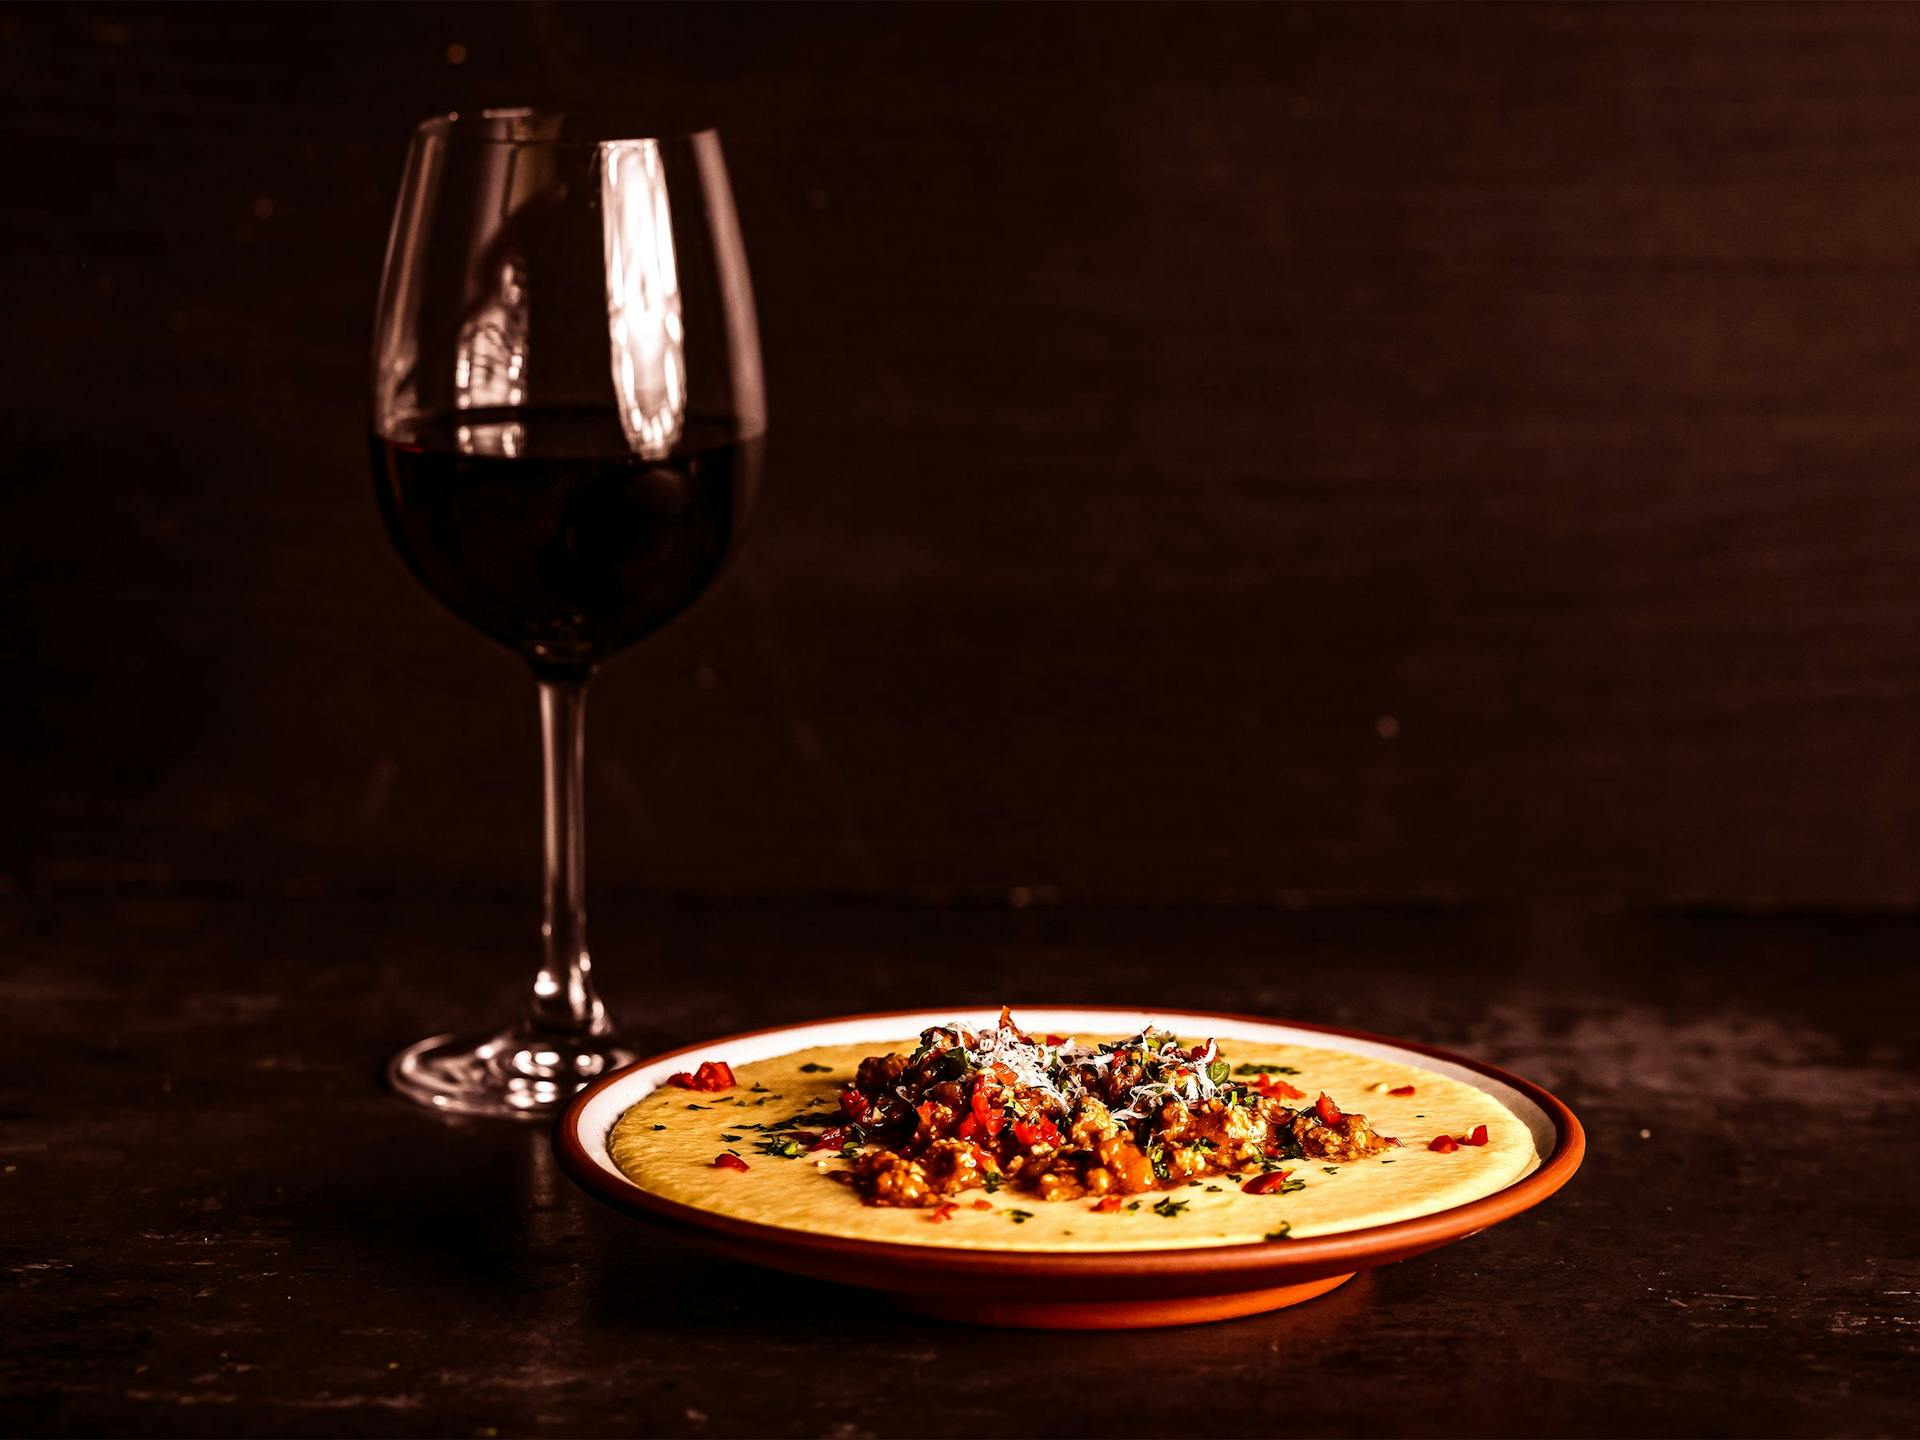 A glass of wine sits next to a bowl of creamy polenta